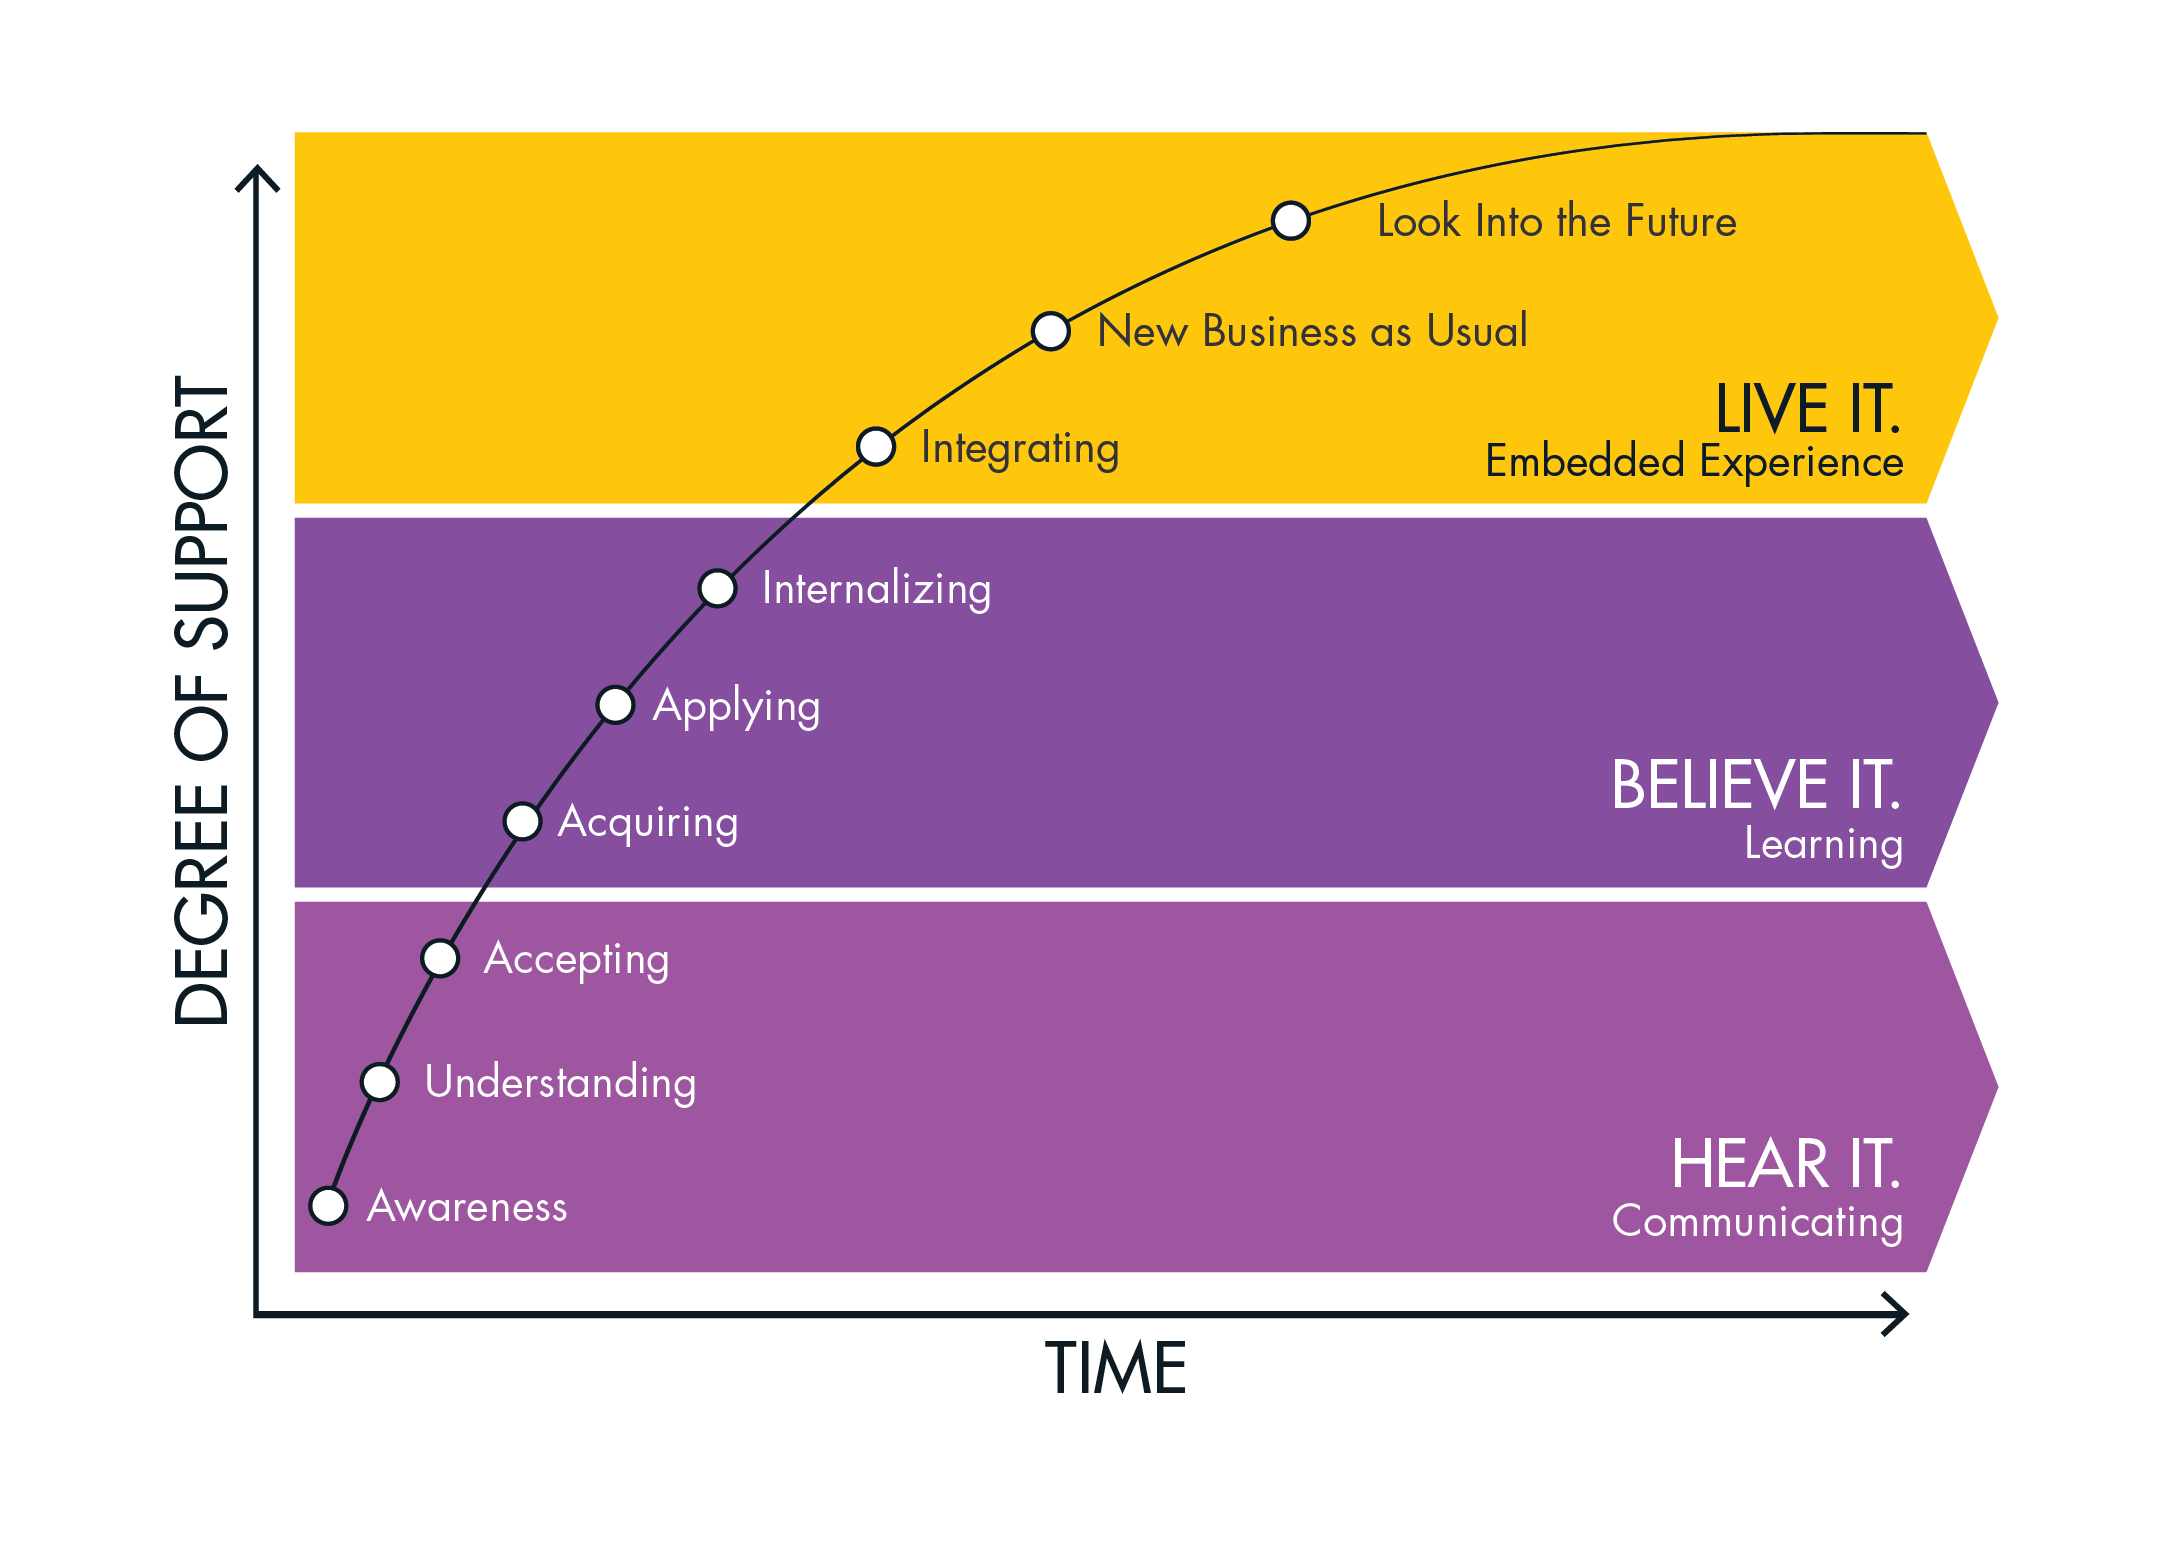 XPLANE's Activation Curve Graph: Phase 1 is Hear it (via strategic communications), Phase 2 is Believe it (via strategic learnings), Phase 3 is Live it (via experience)